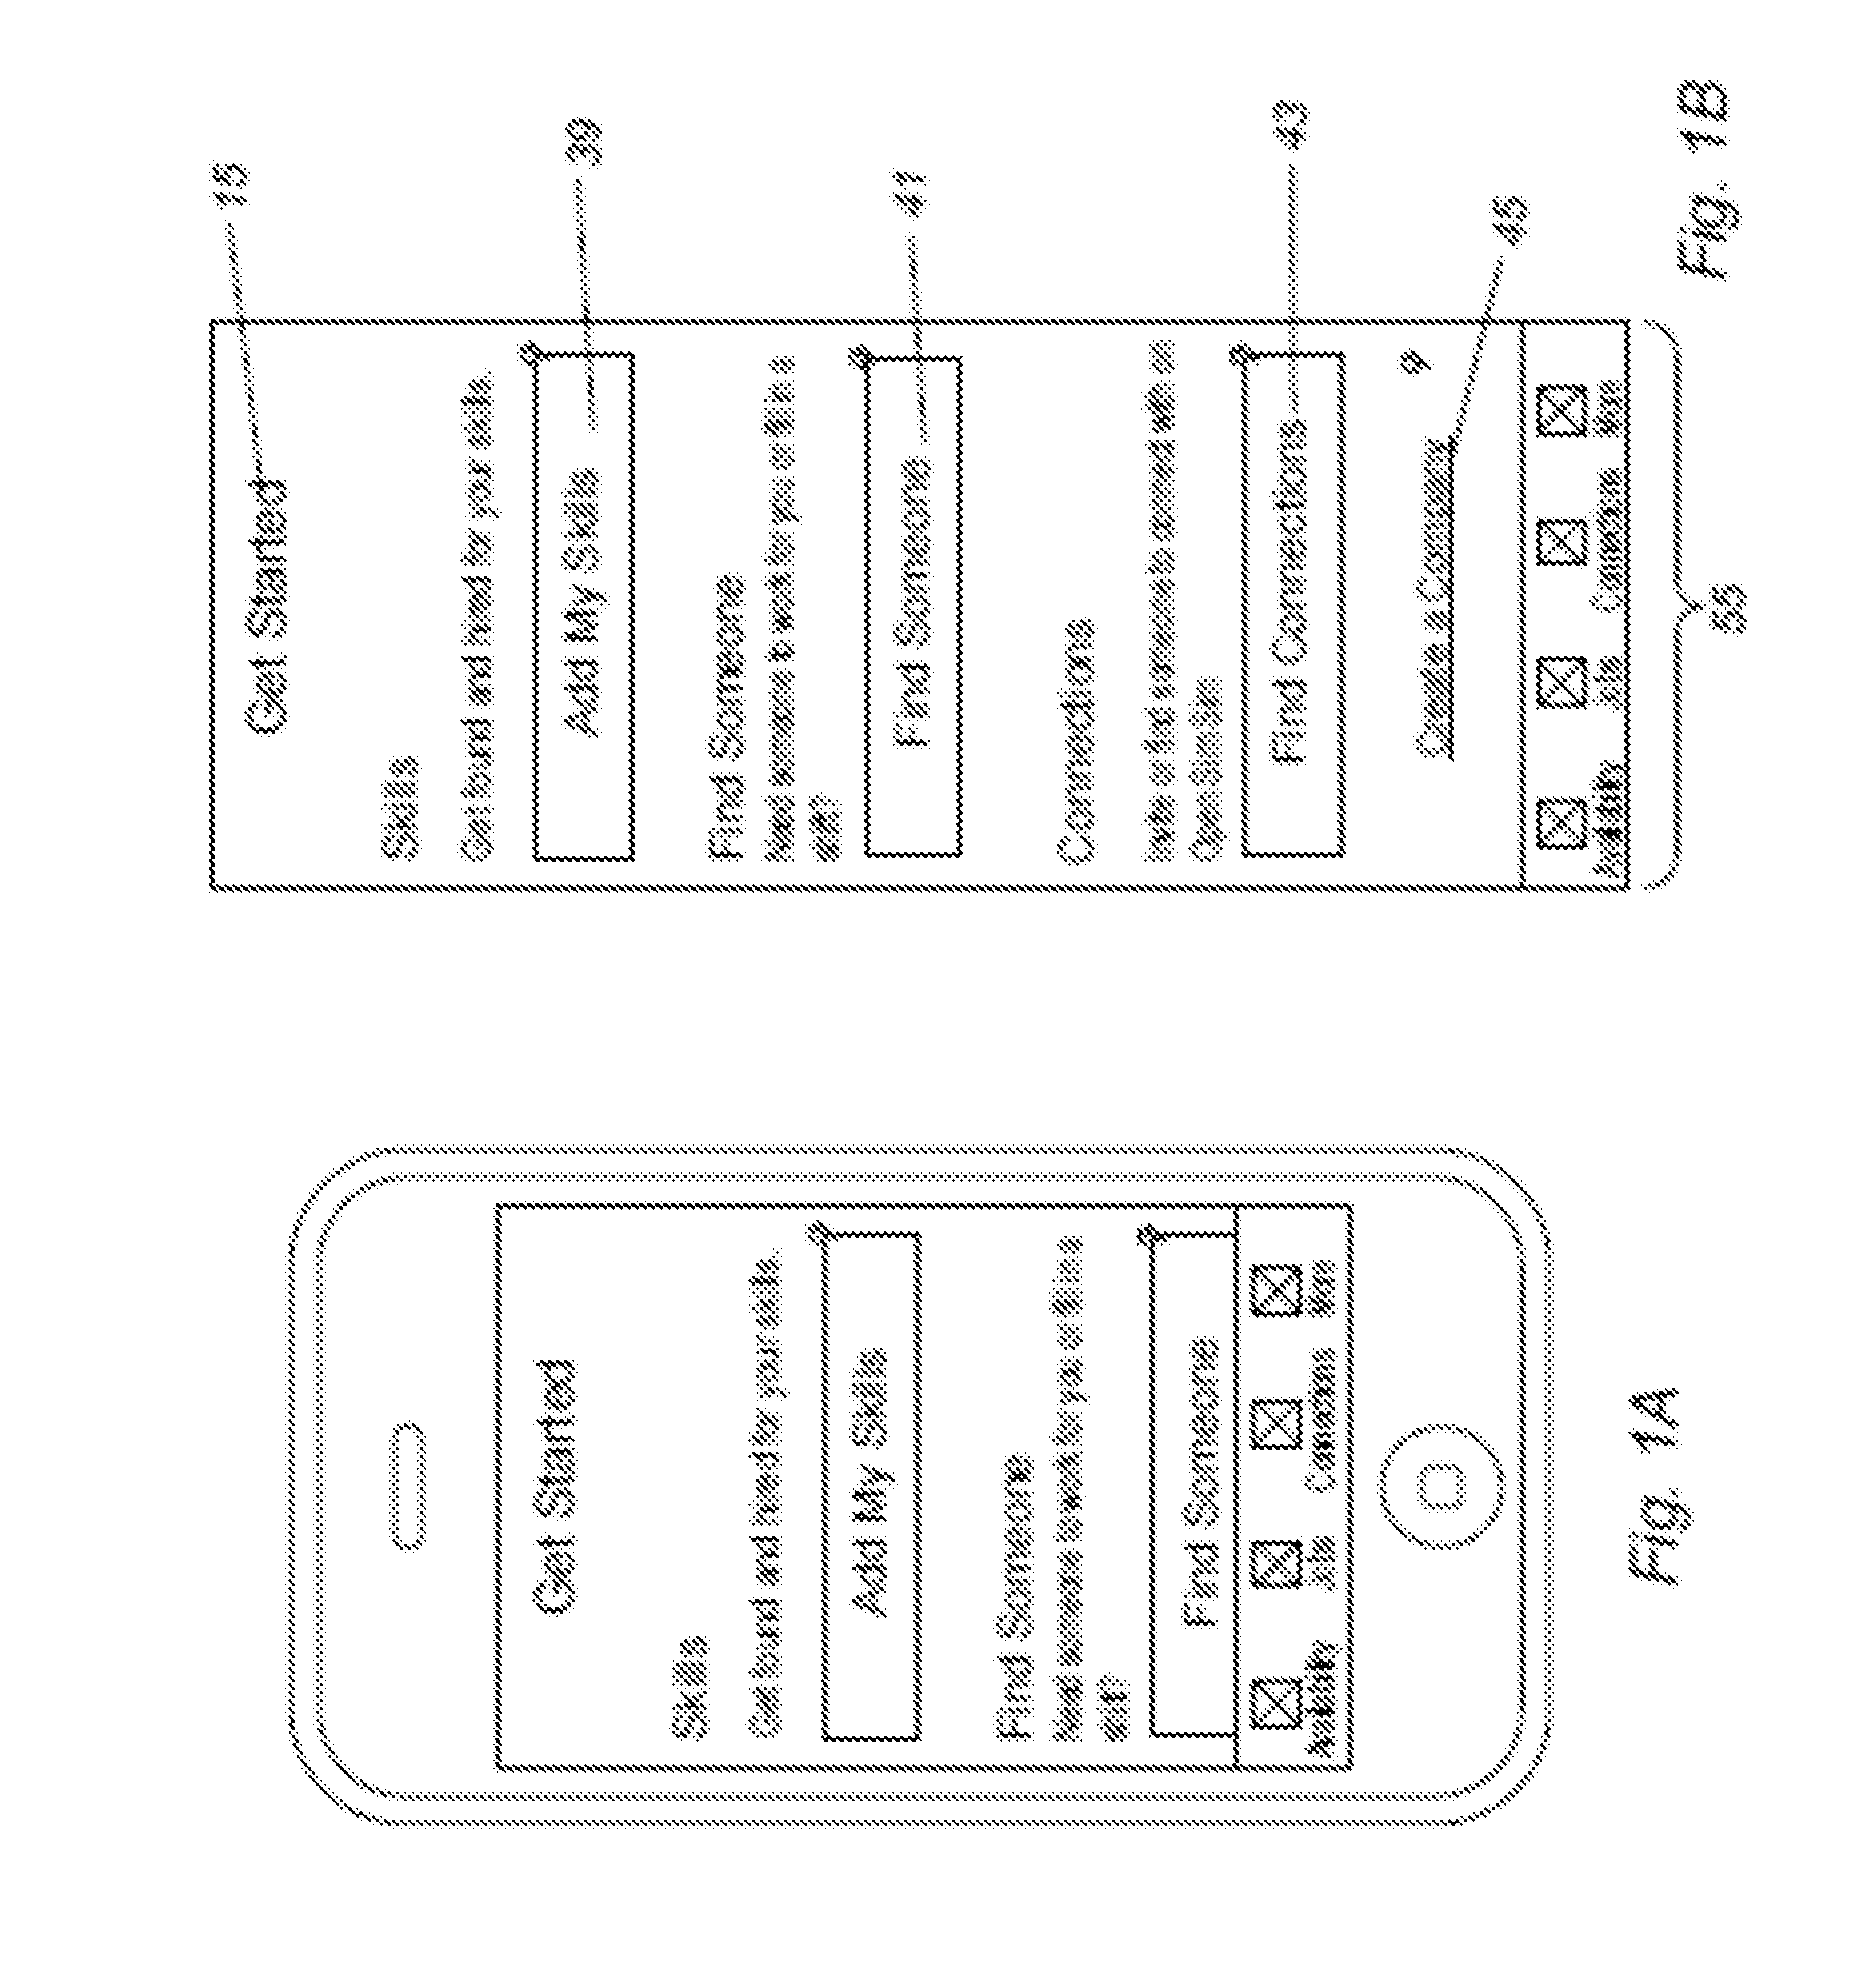 Web and mobile based scheduler and methods for identifying employment networking opportunities utilizing geolocation